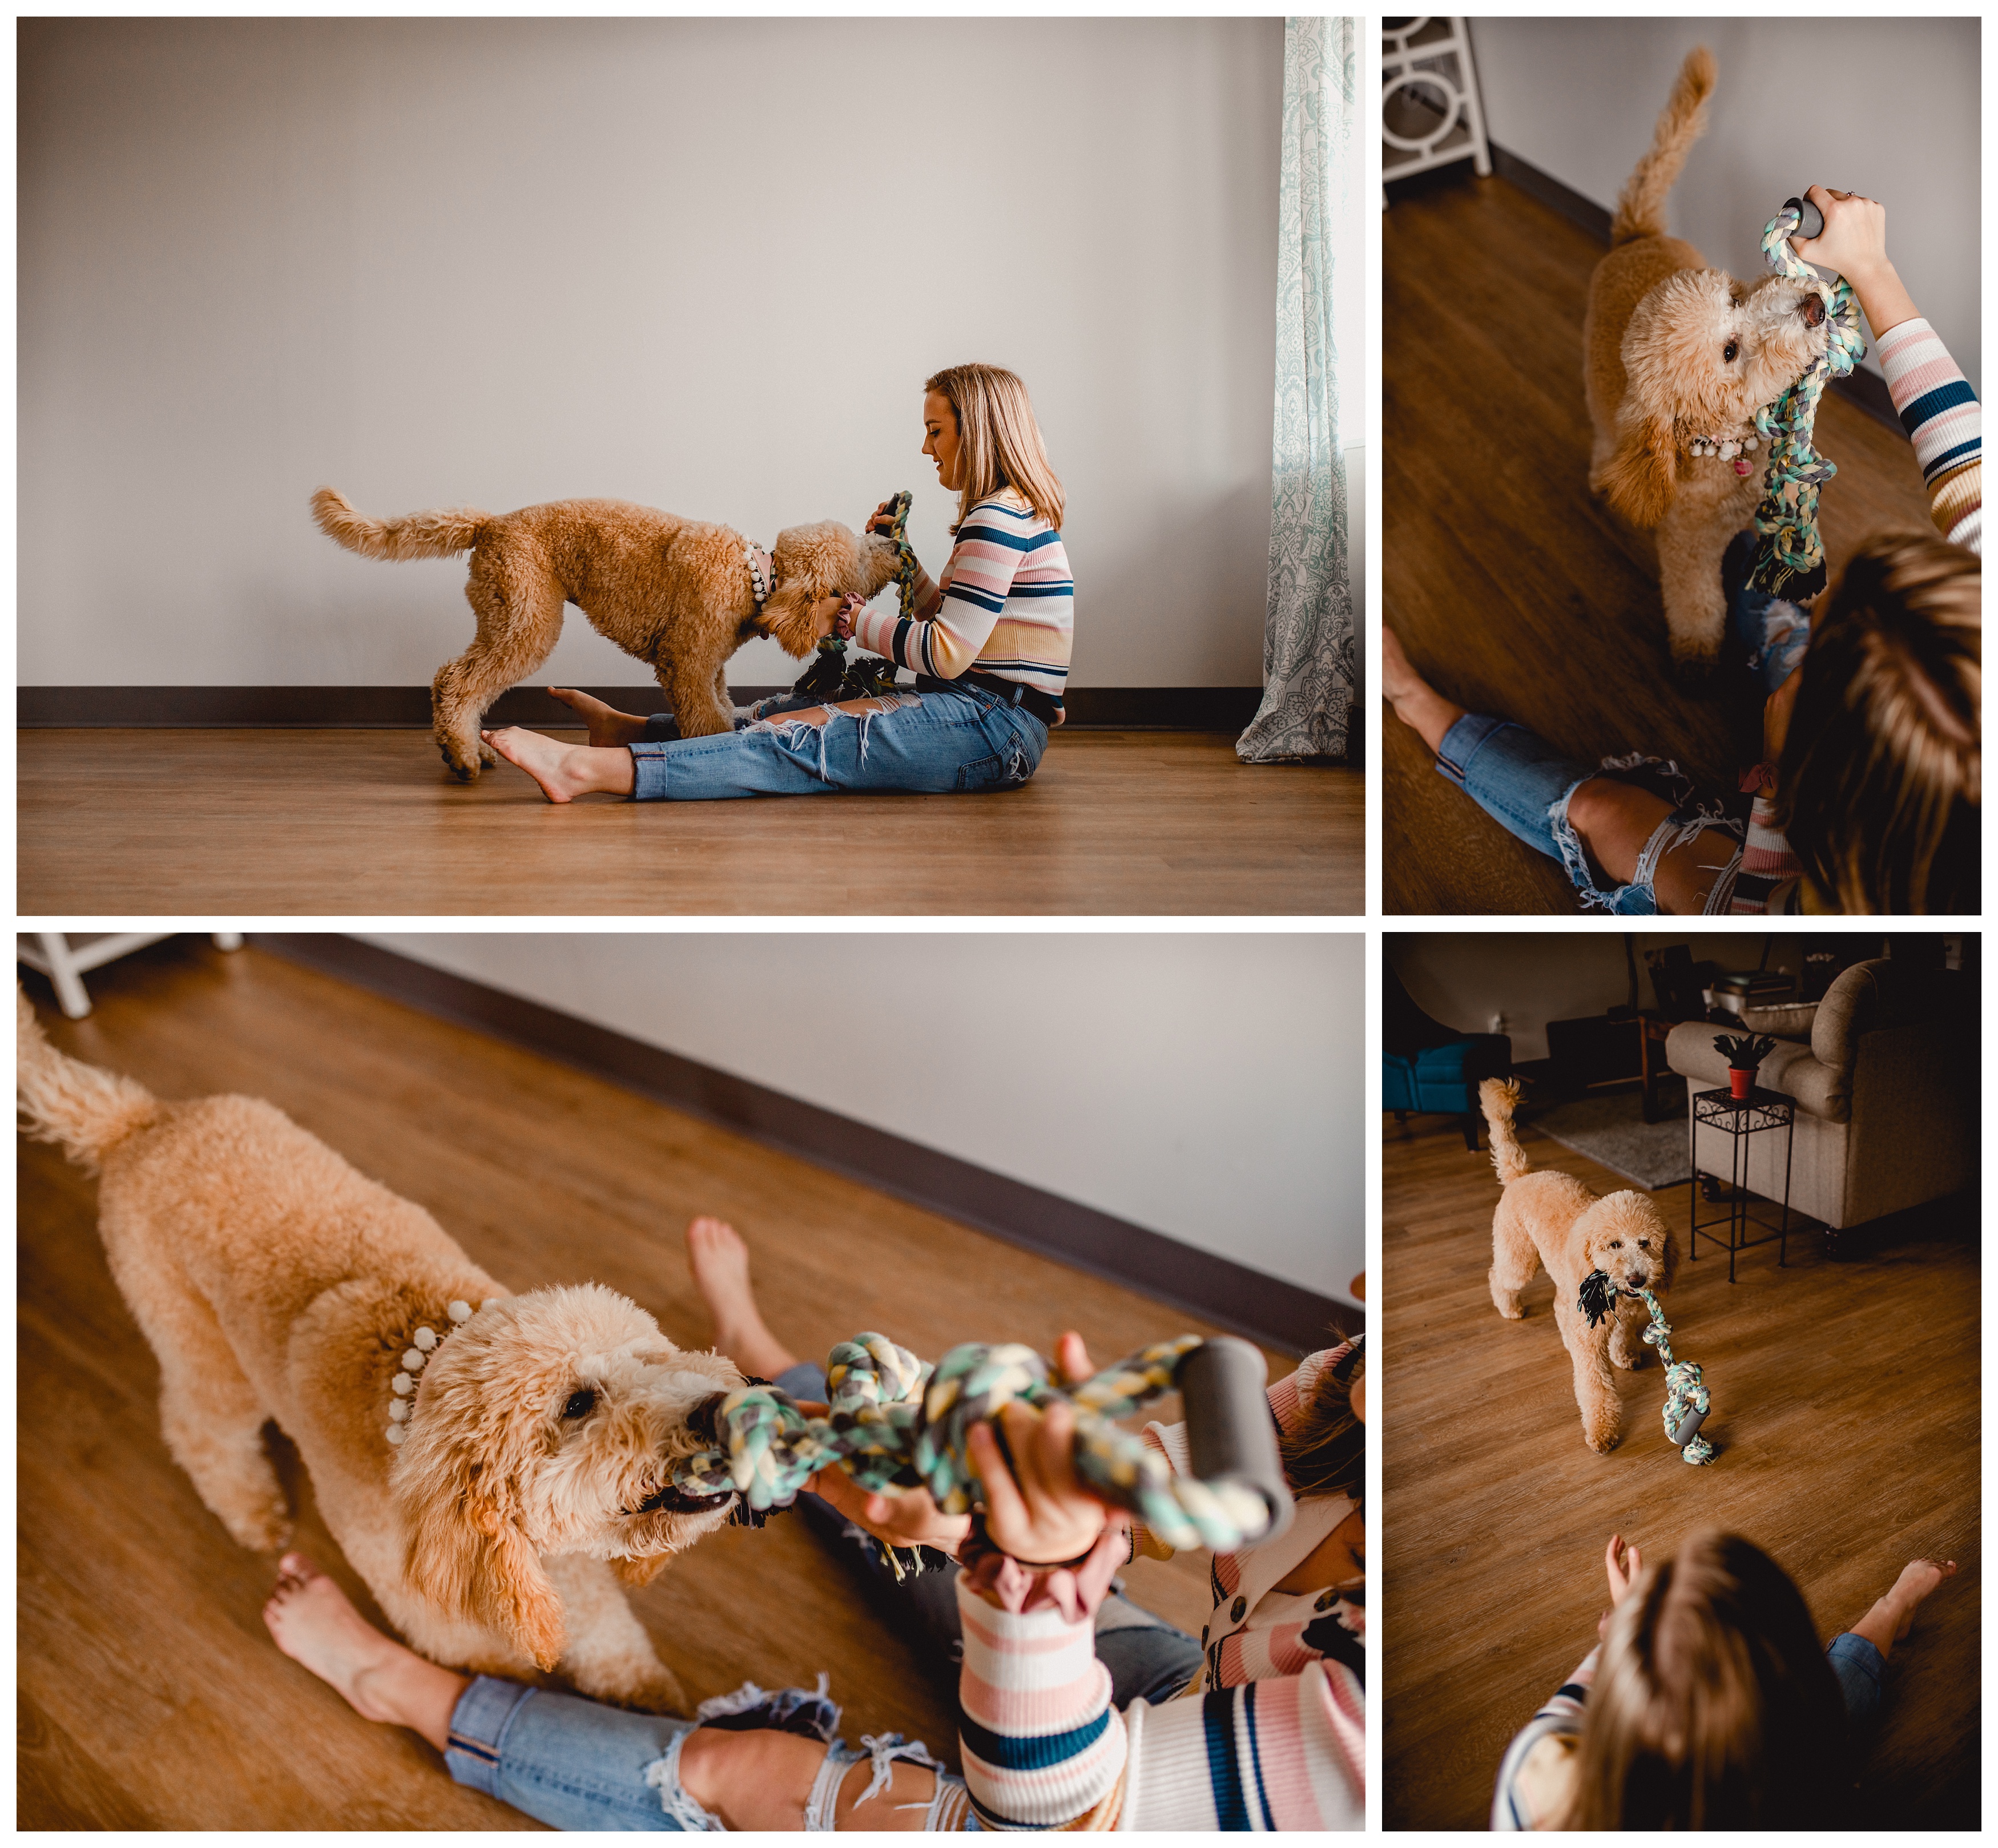 Golden doodle playtime photography in North Florida. Shelly Williams Photography